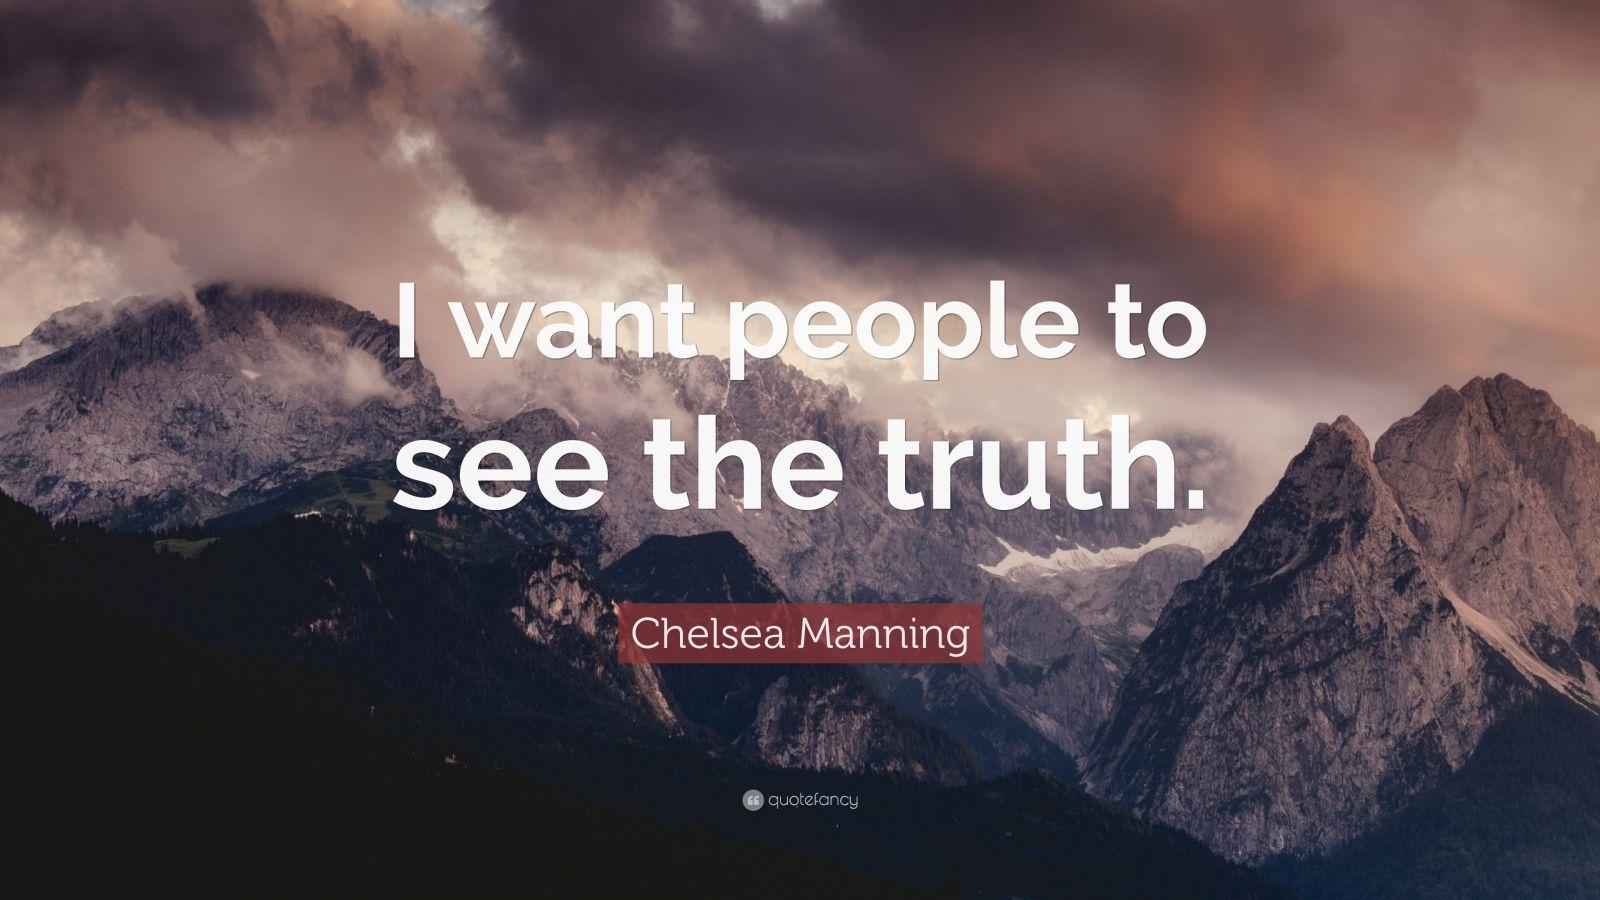 Chelsea Manning Quote: "I want people to see the truth. 